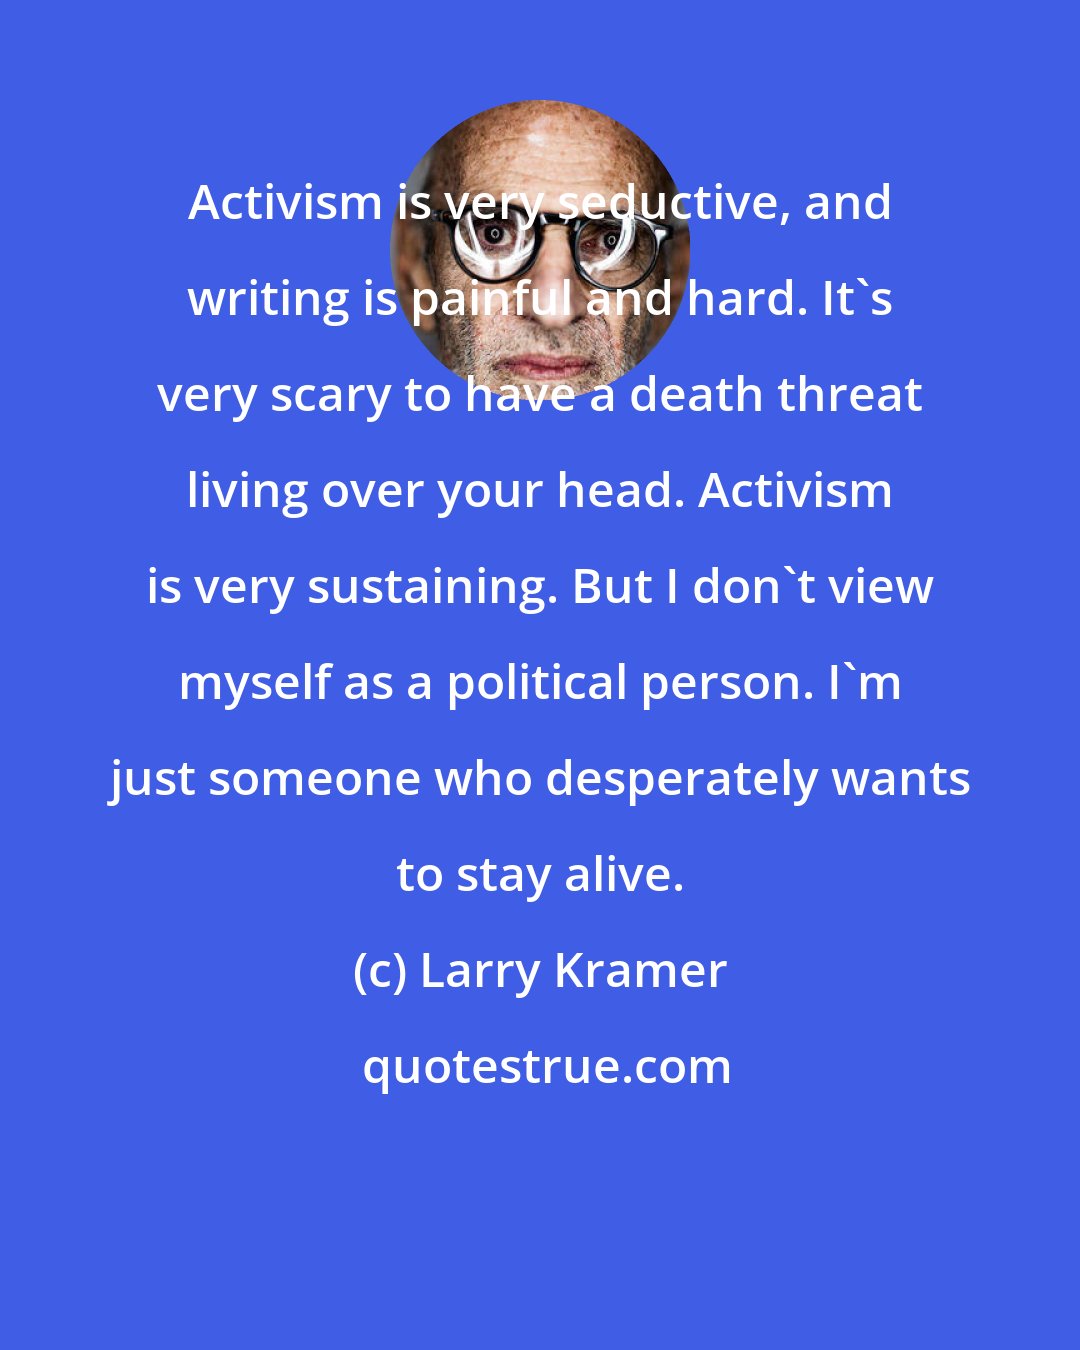 Larry Kramer: Activism is very seductive, and writing is painful and hard. It's very scary to have a death threat living over your head. Activism is very sustaining. But I don't view myself as a political person. I'm just someone who desperately wants to stay alive.